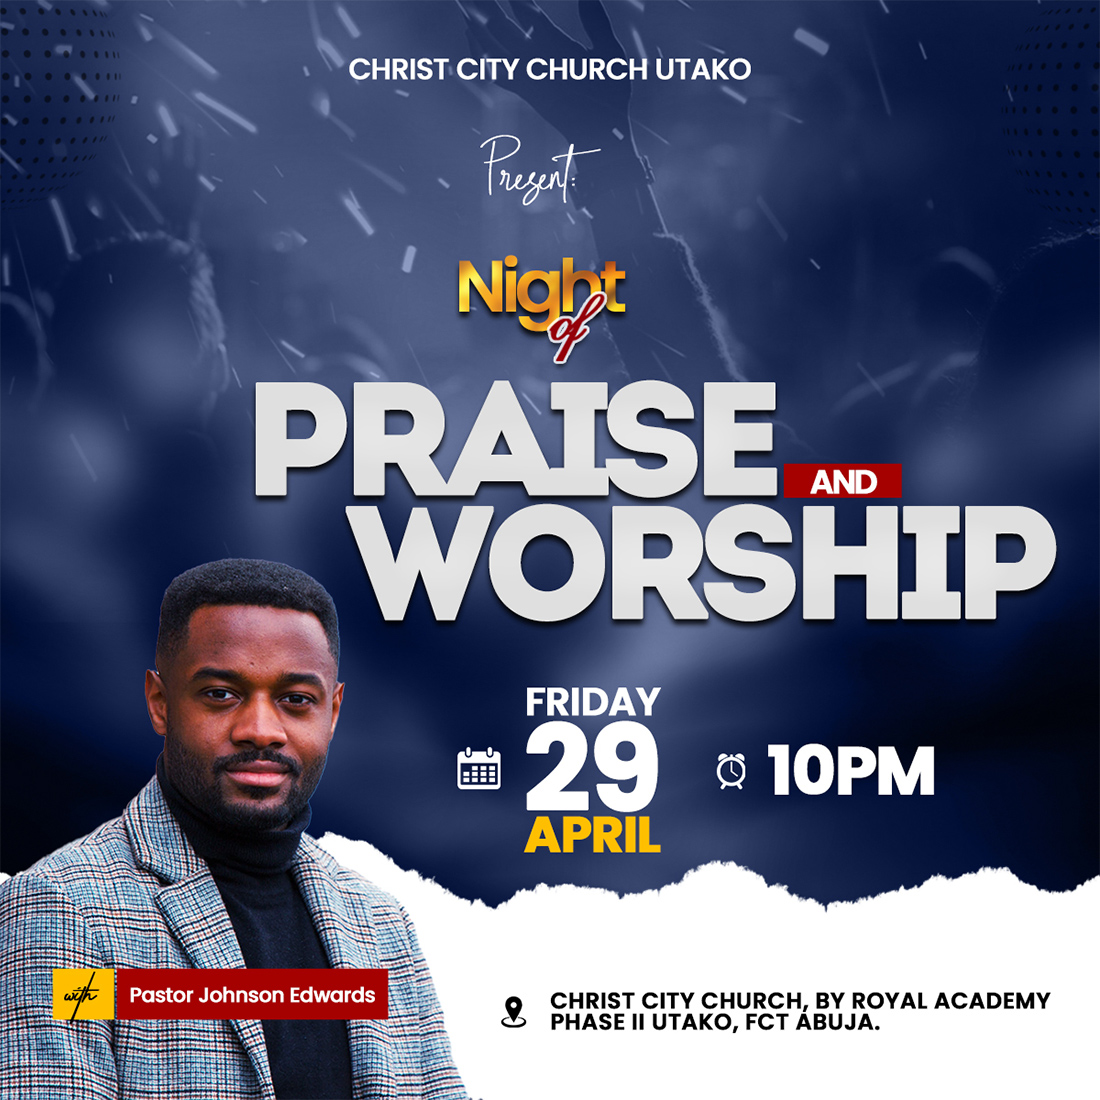 Night of Praise and Worship Flyer Design Template cover image.